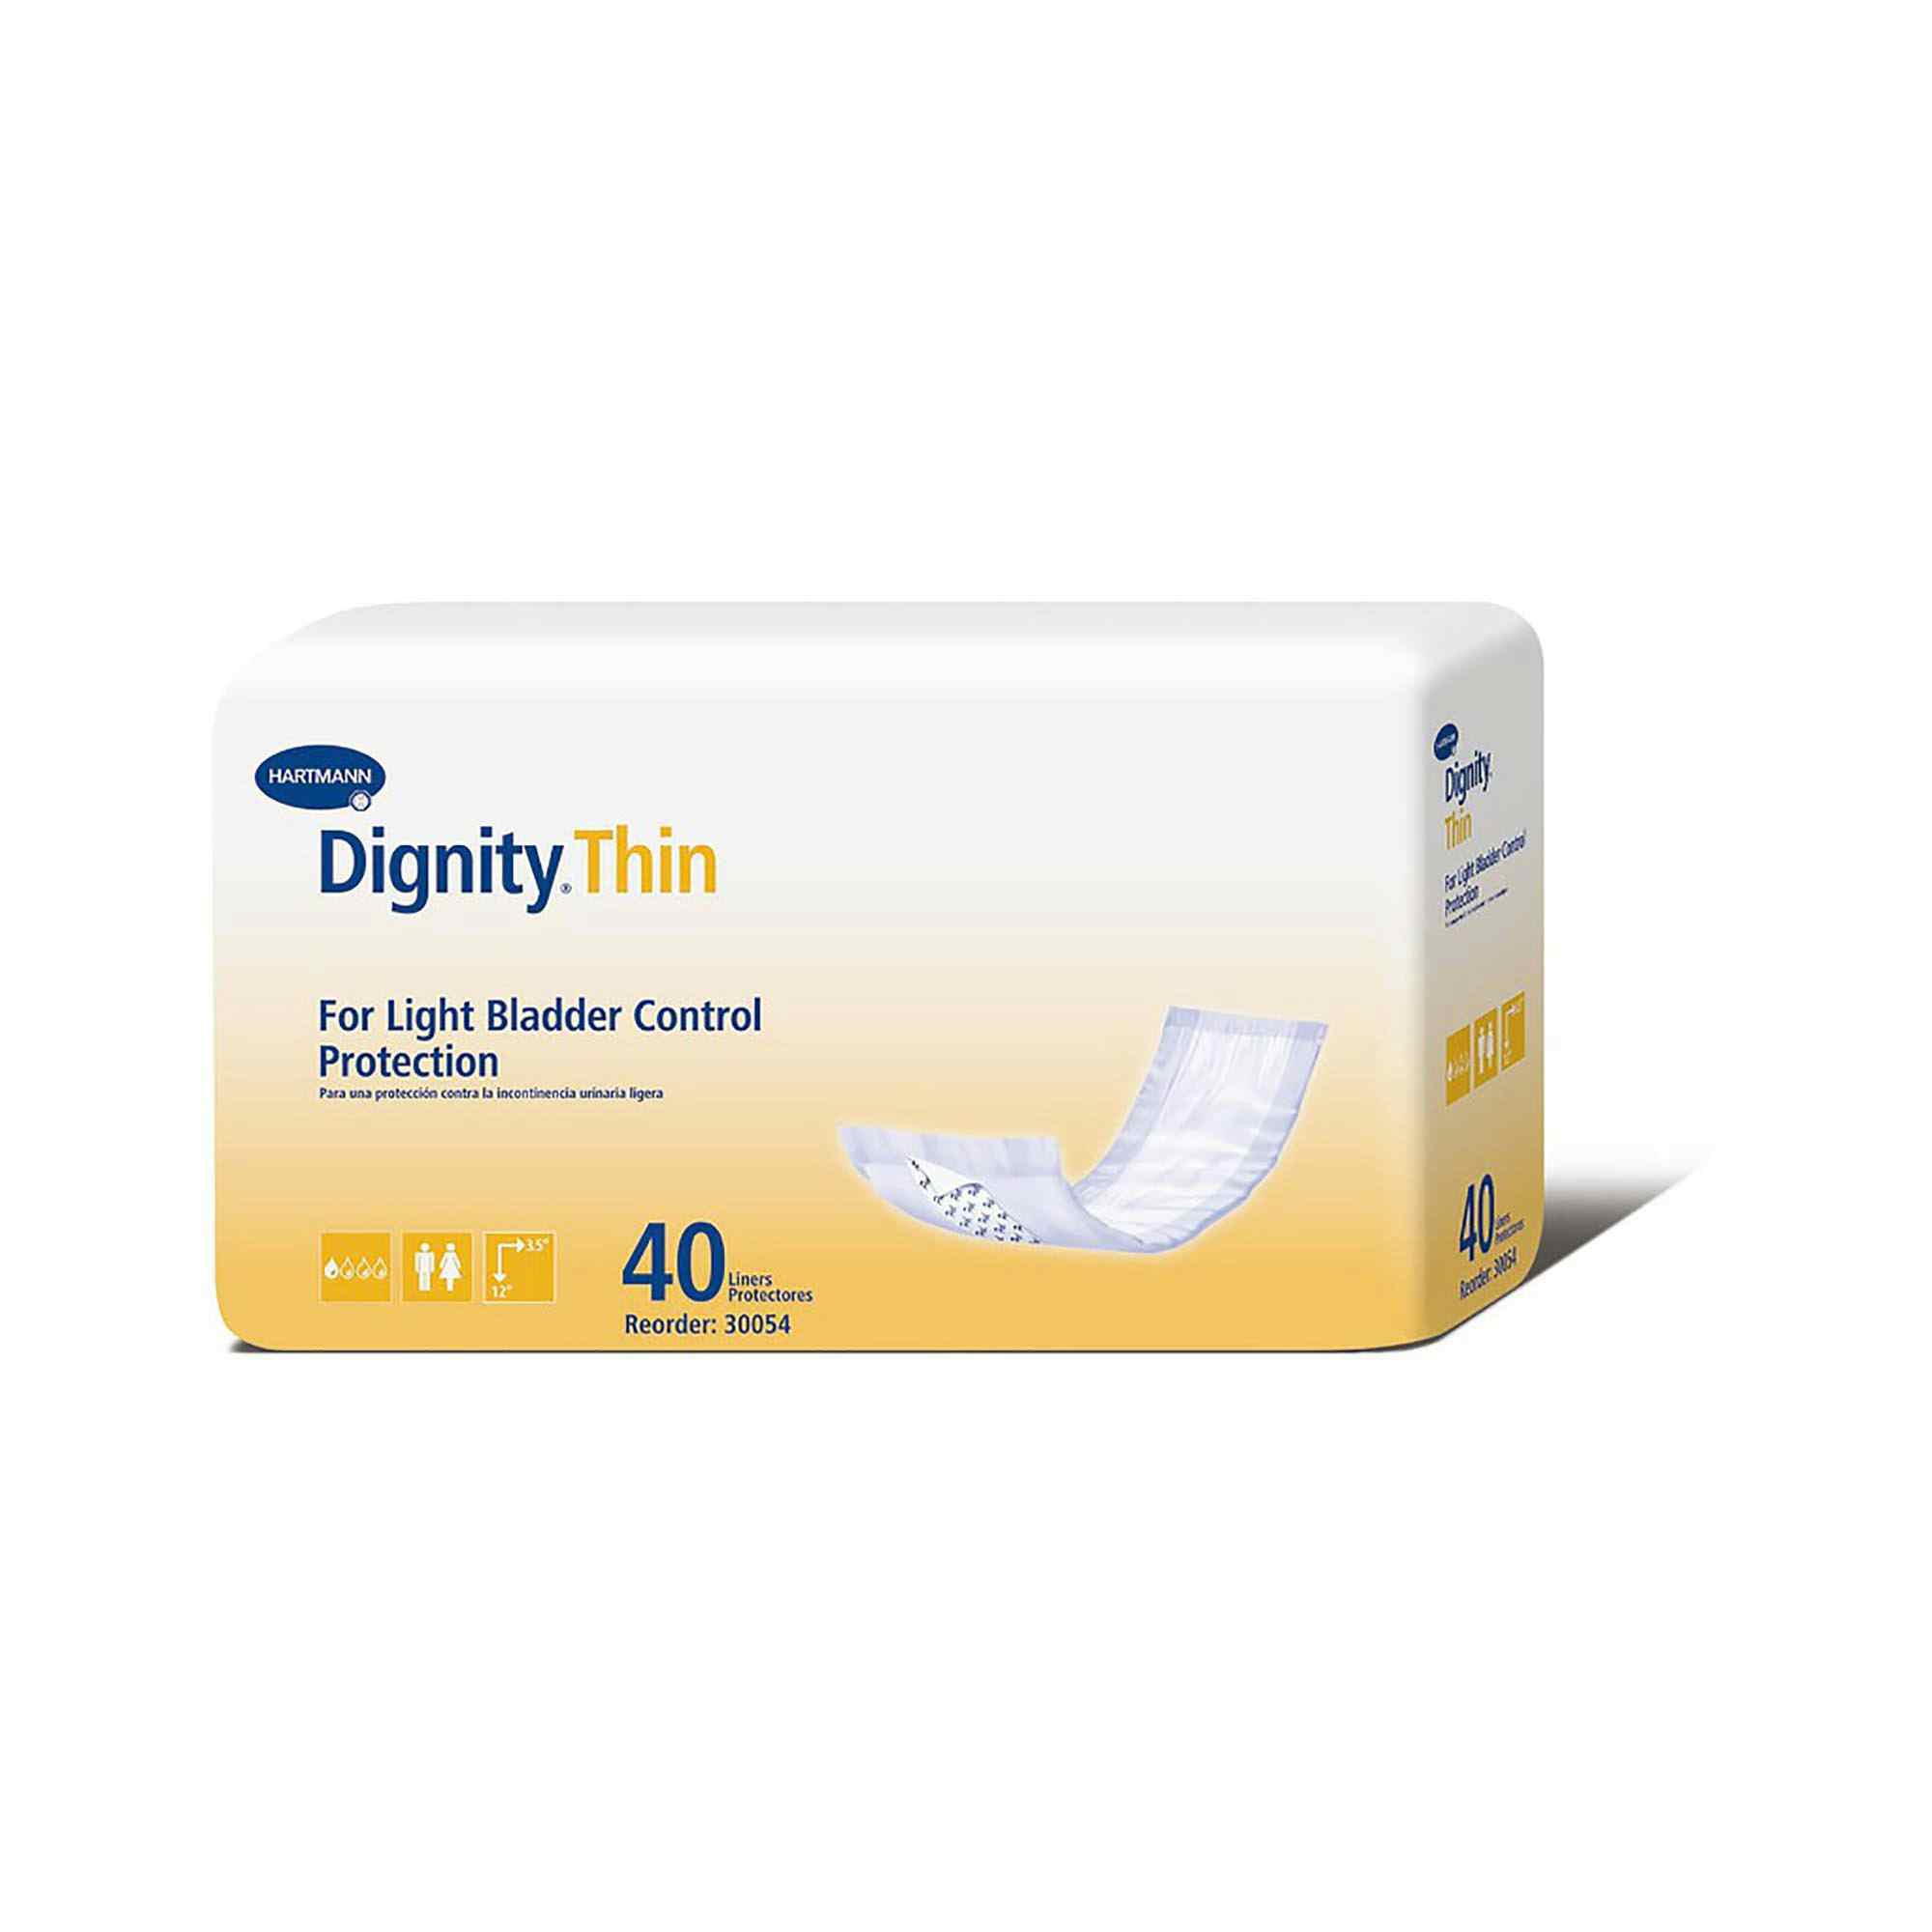 Dignity Thin Adult Unisex Disposable Bladder Control Pad, Light Absorbency, 30054, Green - One Size Fits Most - Bag of 40